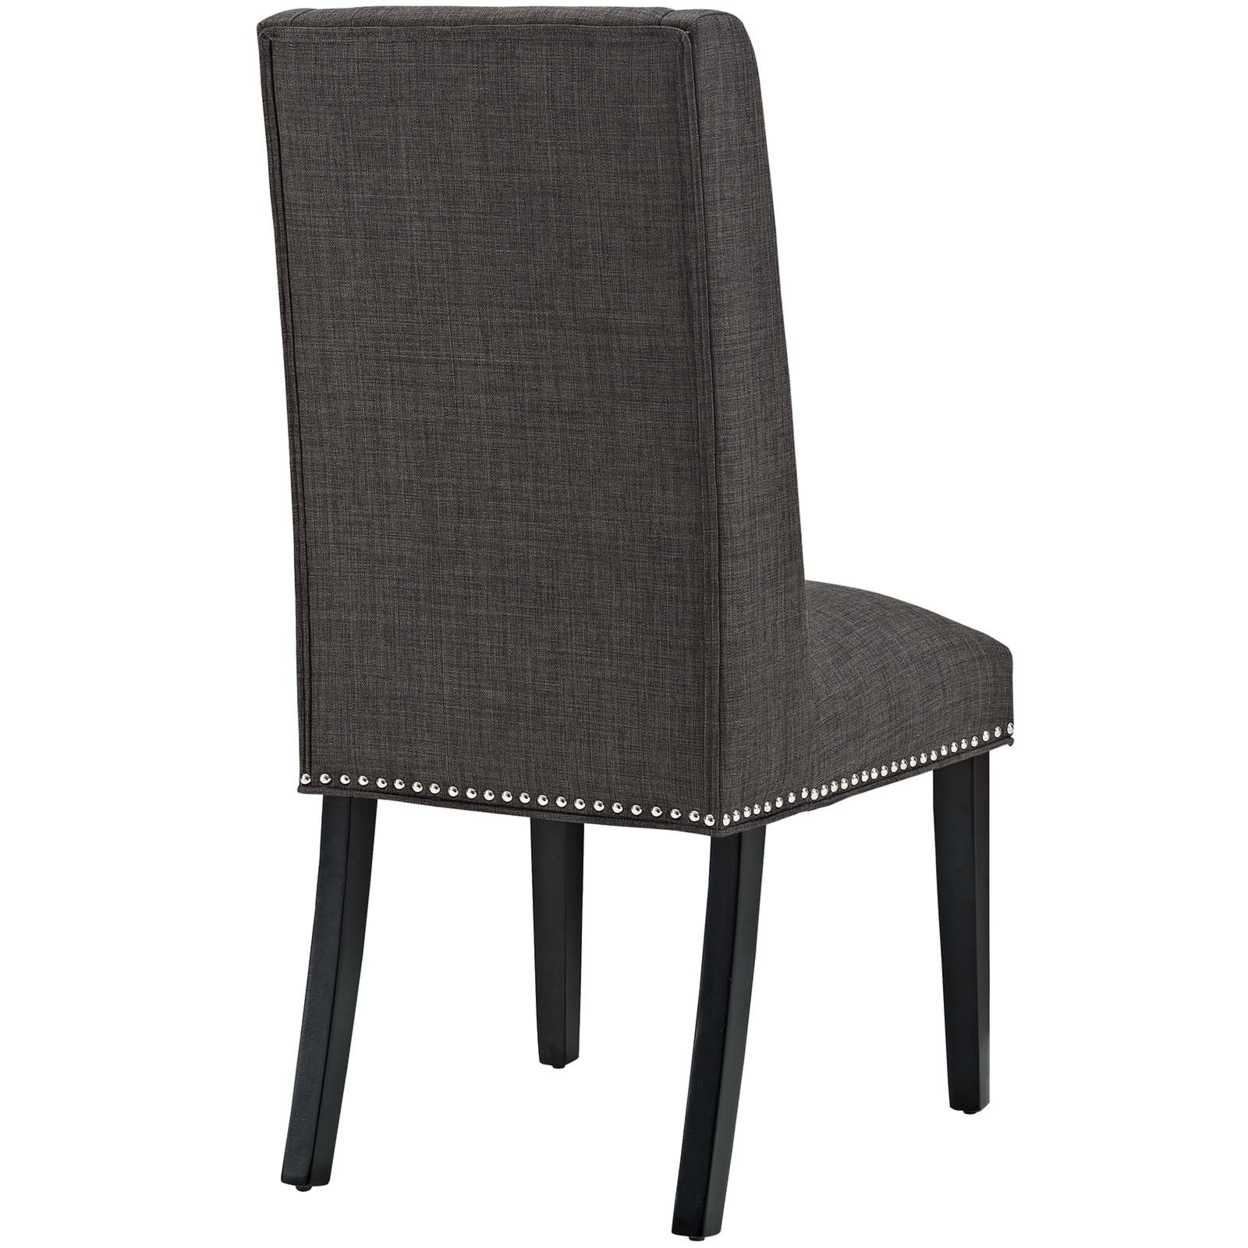 Baron Fabric Dining Chair, Brown